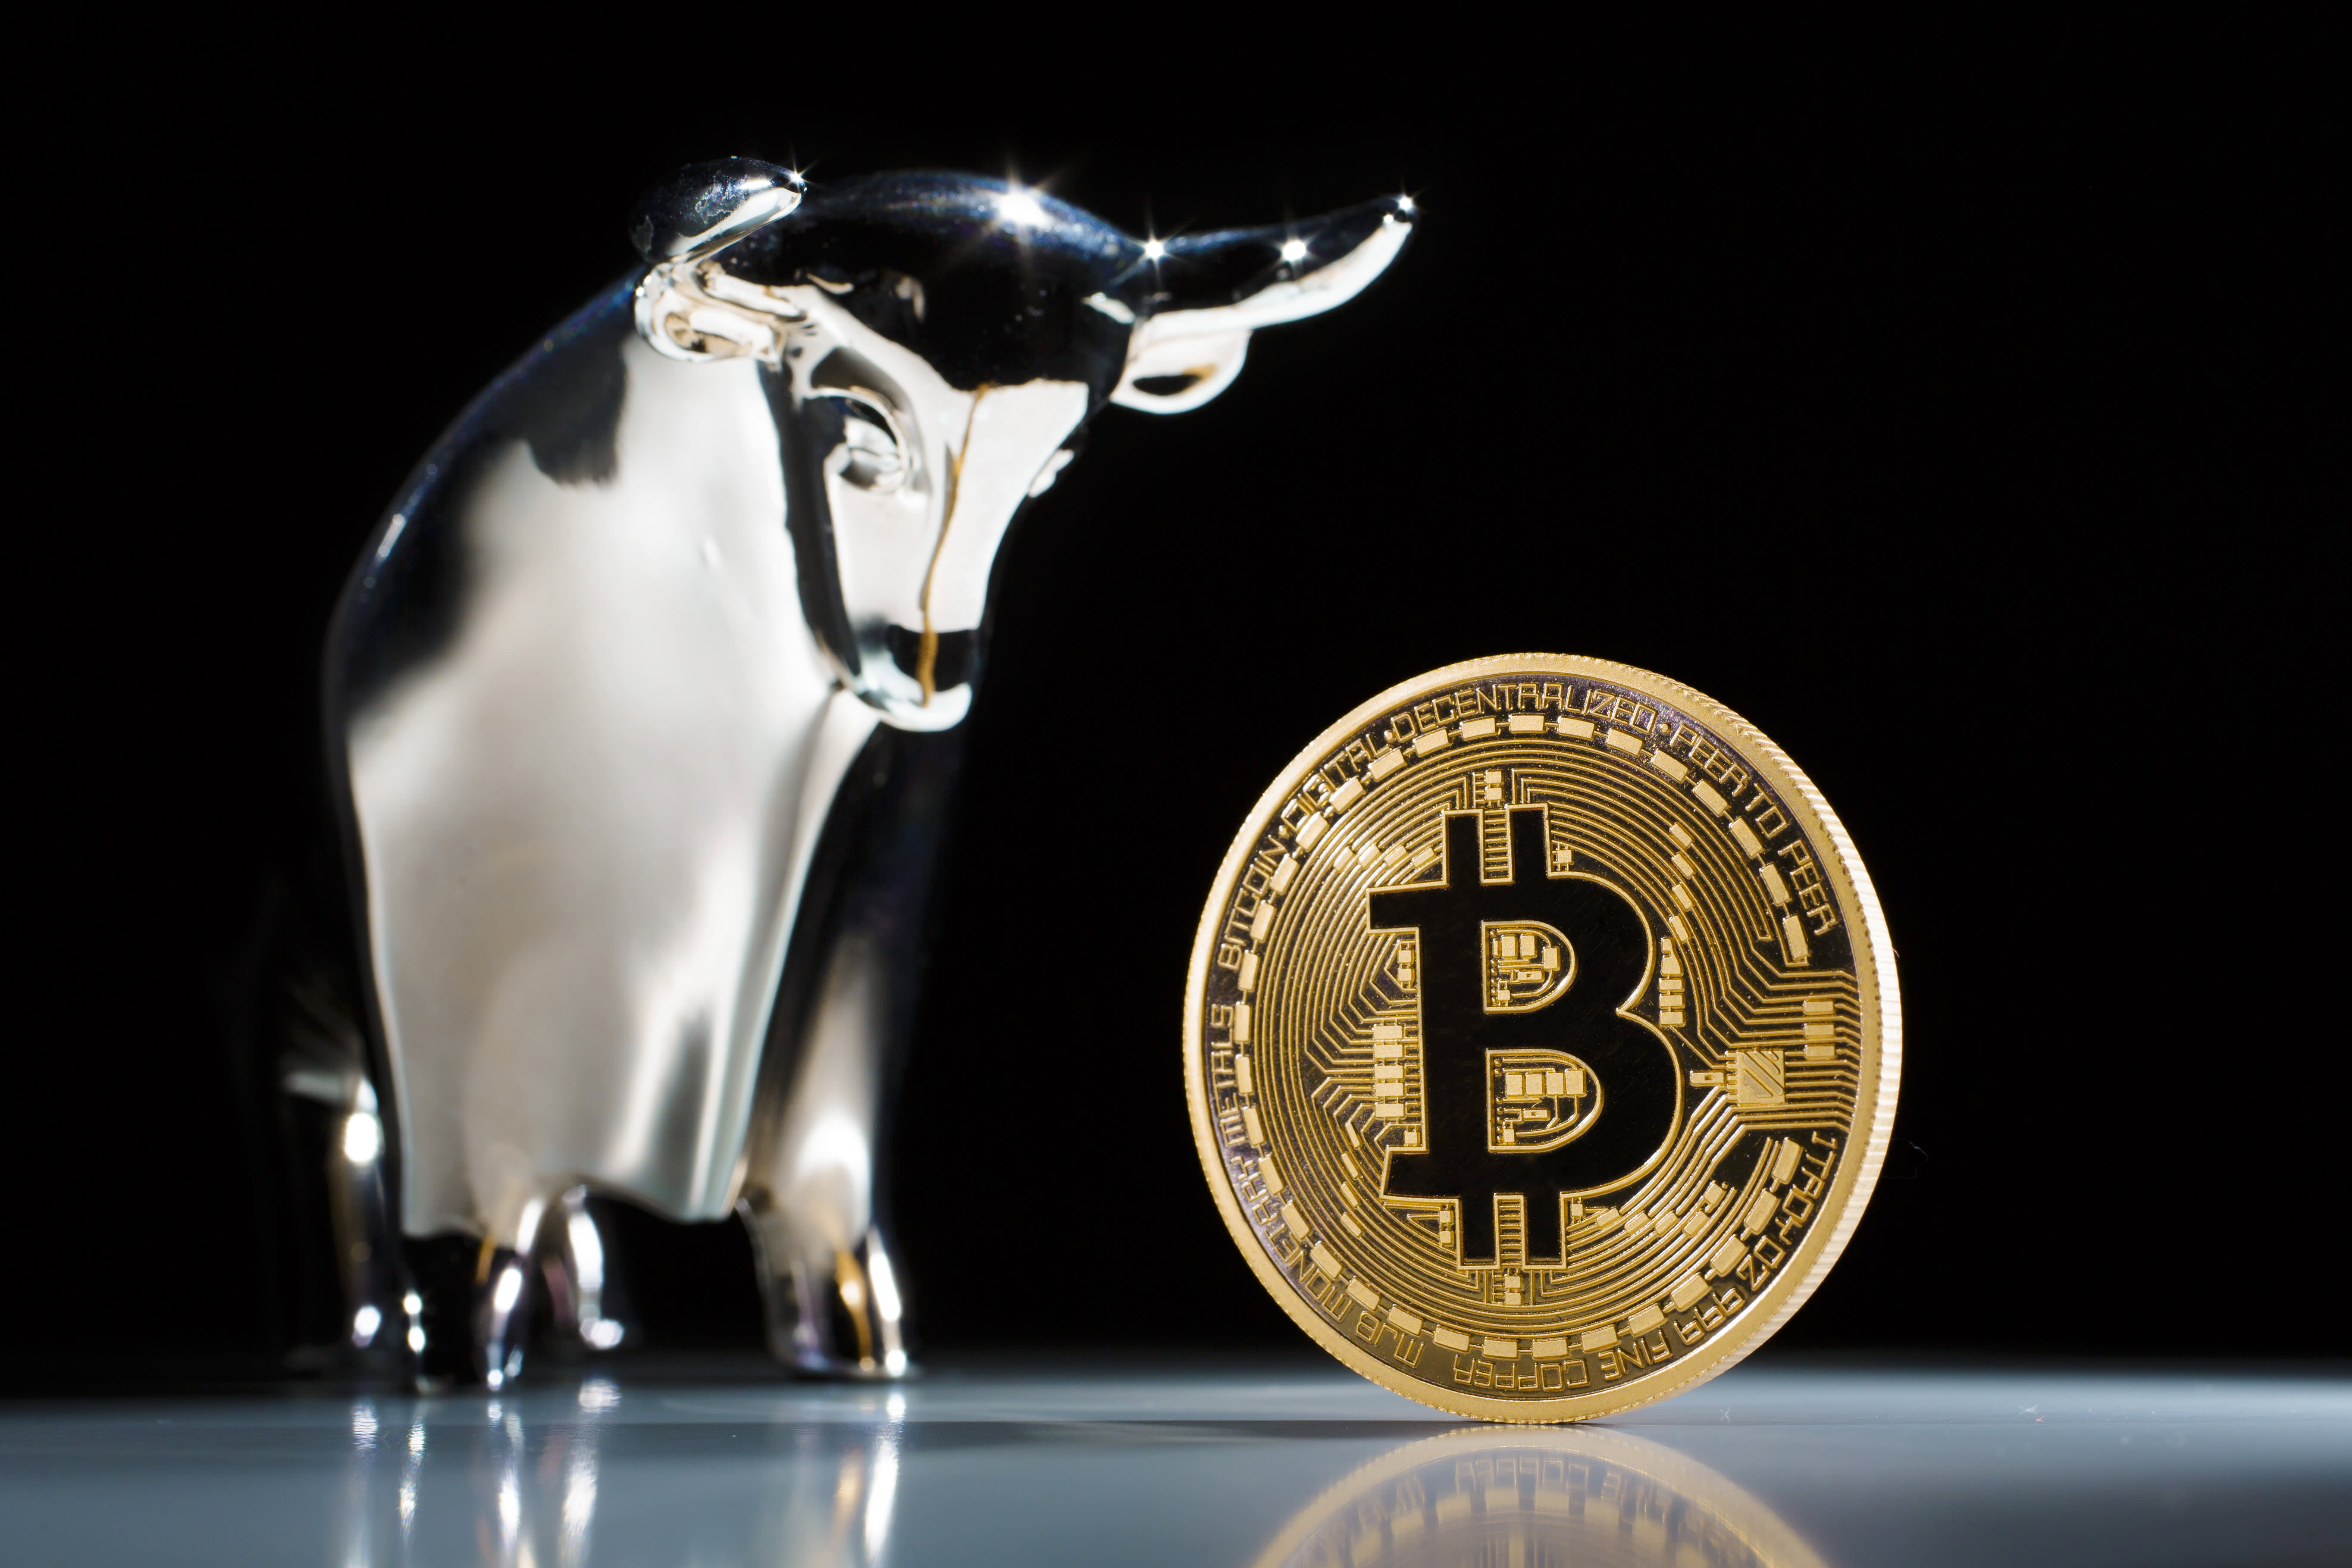 Bitcoin is overdue for a pause before bullish trend continues, says Wolfe Research